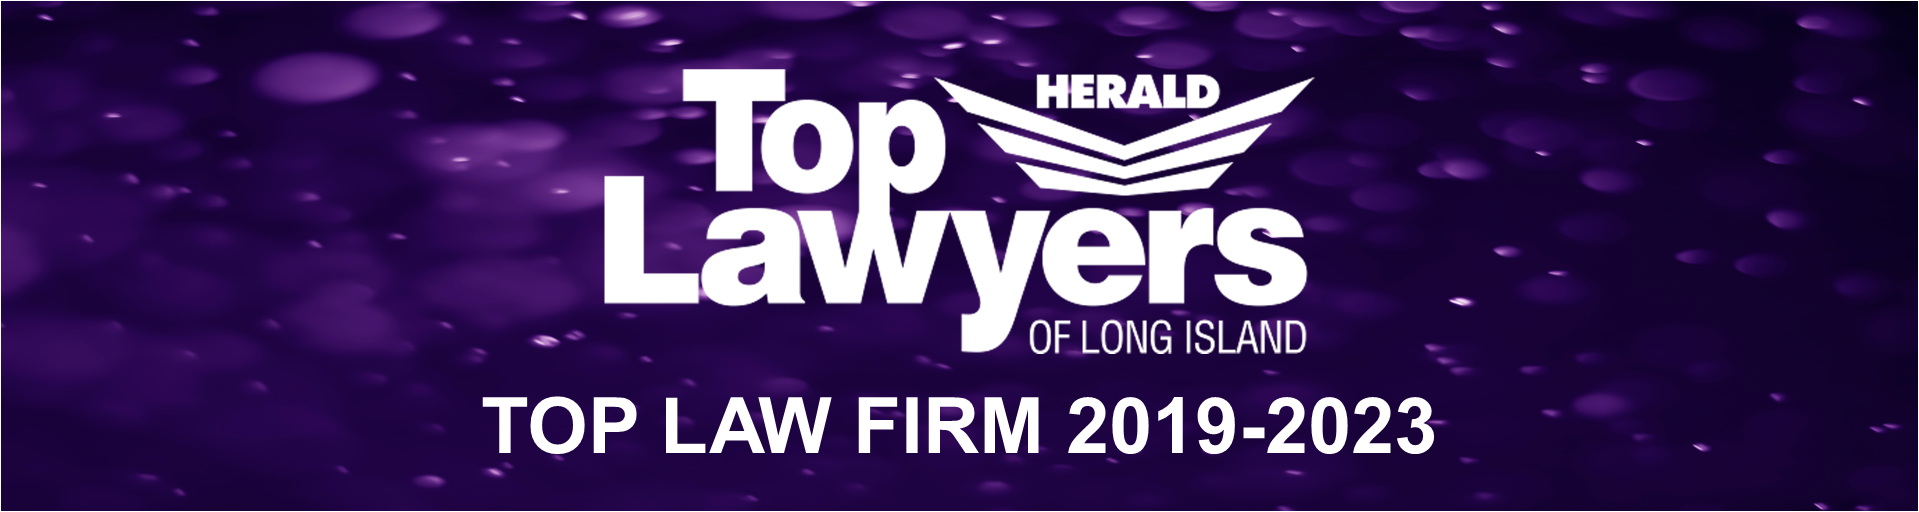 Top Law Firm 2019-2023 Banner